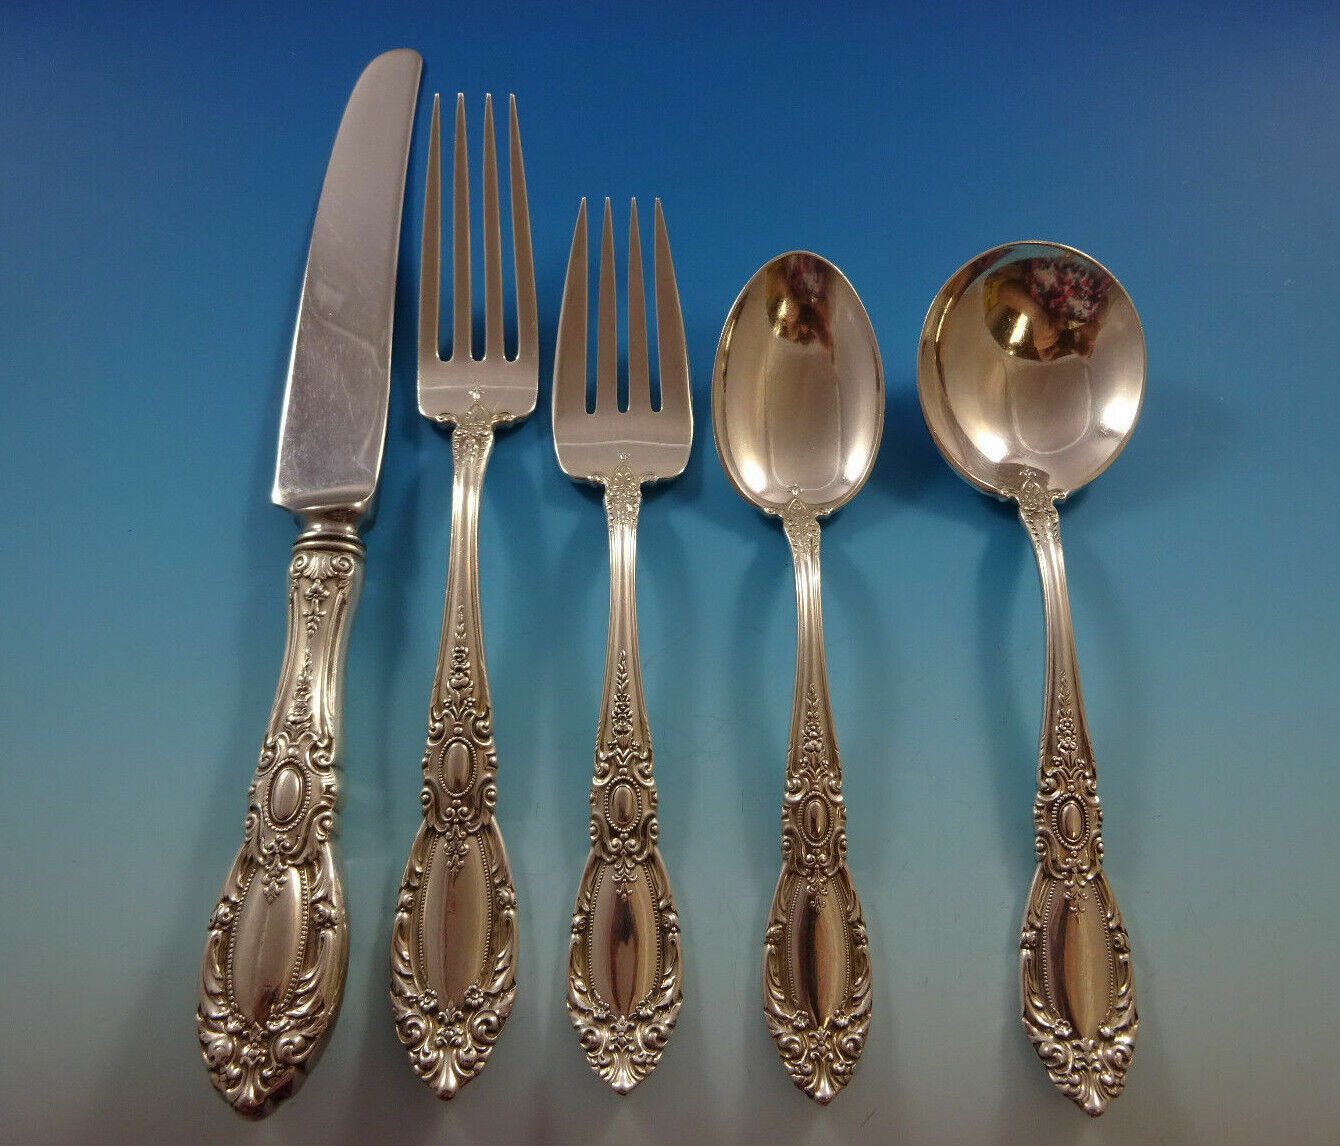 Primary image for King Richard by Towle Sterling Silver Flatware Set For 8 Service 40 Pieces